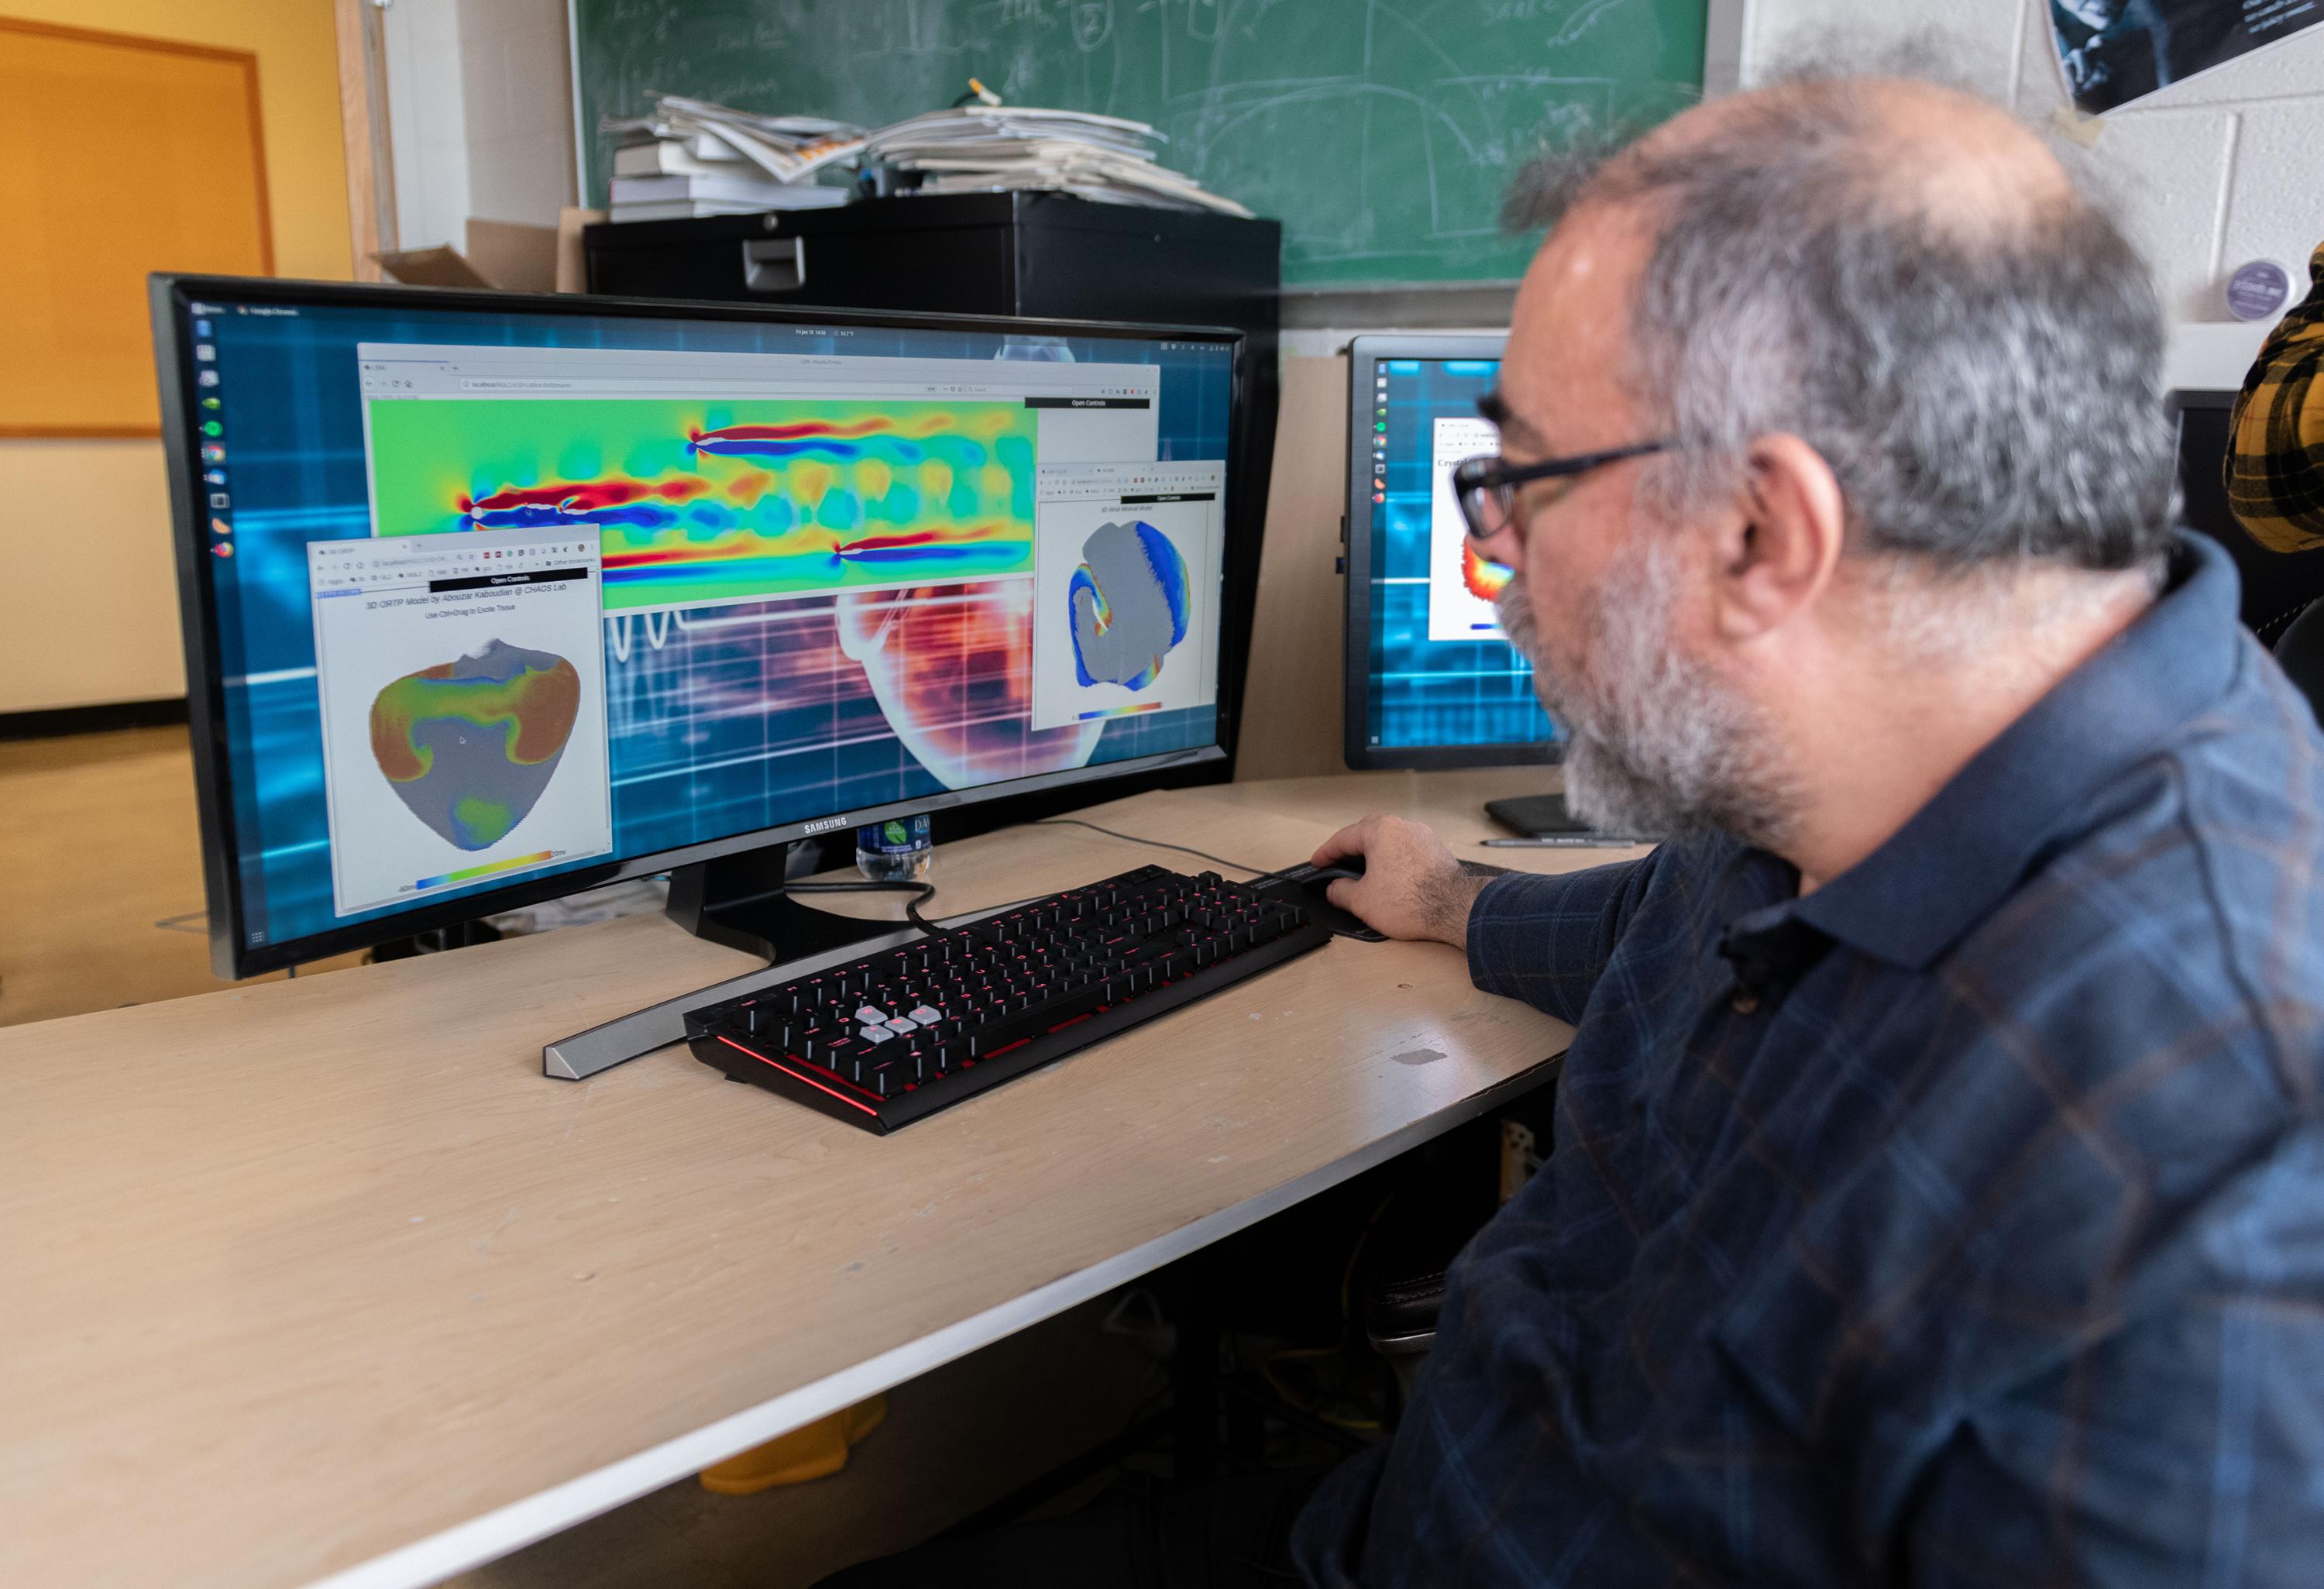 Flavio Fenton, a professor in the School of Physics at the Georgia Institute of Technology, examines cardiac and fluid flow simulations created on a system that uses graphics processing chips designed for gaming applications and software that runs on ordinary web browsers. (Photo: Allison Carter, Georgia Tech)